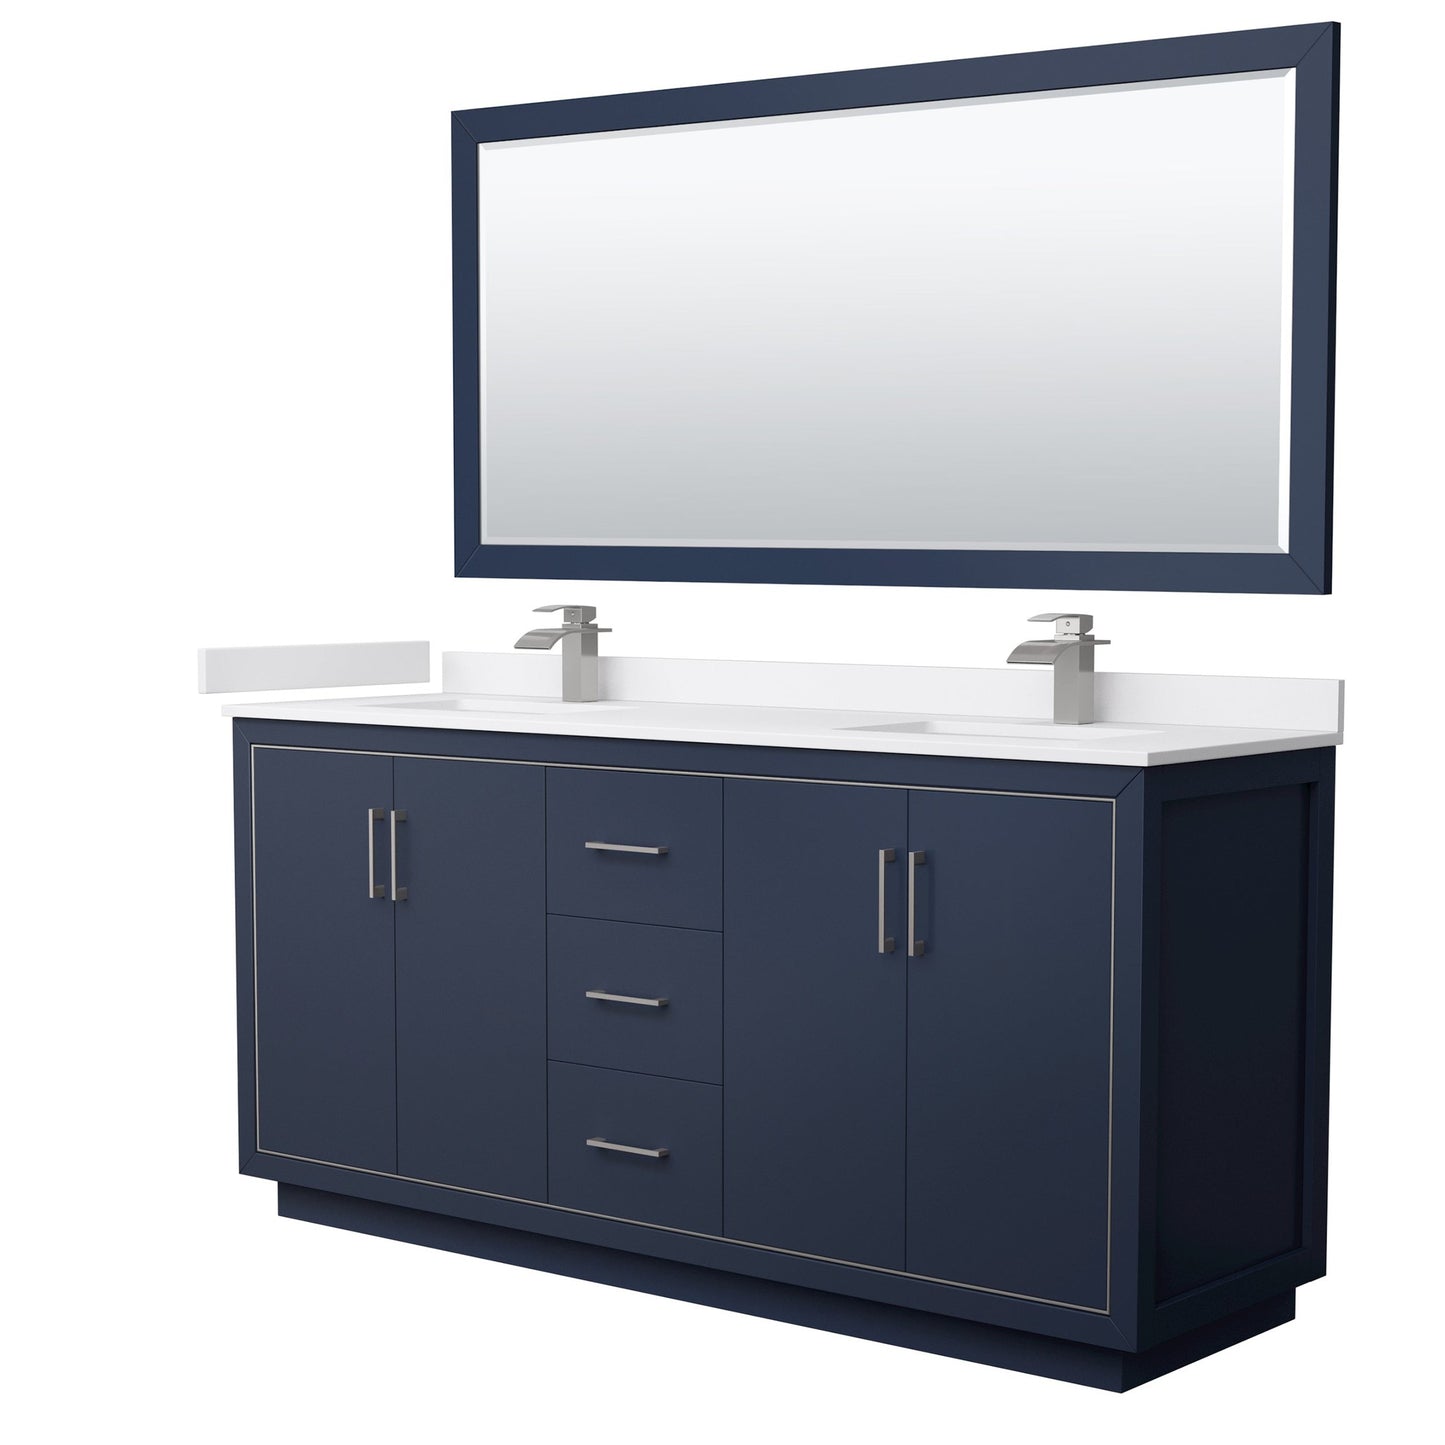 Wyndham Collection Icon 72" Double Bathroom Vanity in Dark Blue, White Cultured Marble Countertop, Undermount Square Sinks, Brushed Nickel Trim, 70" Mirror